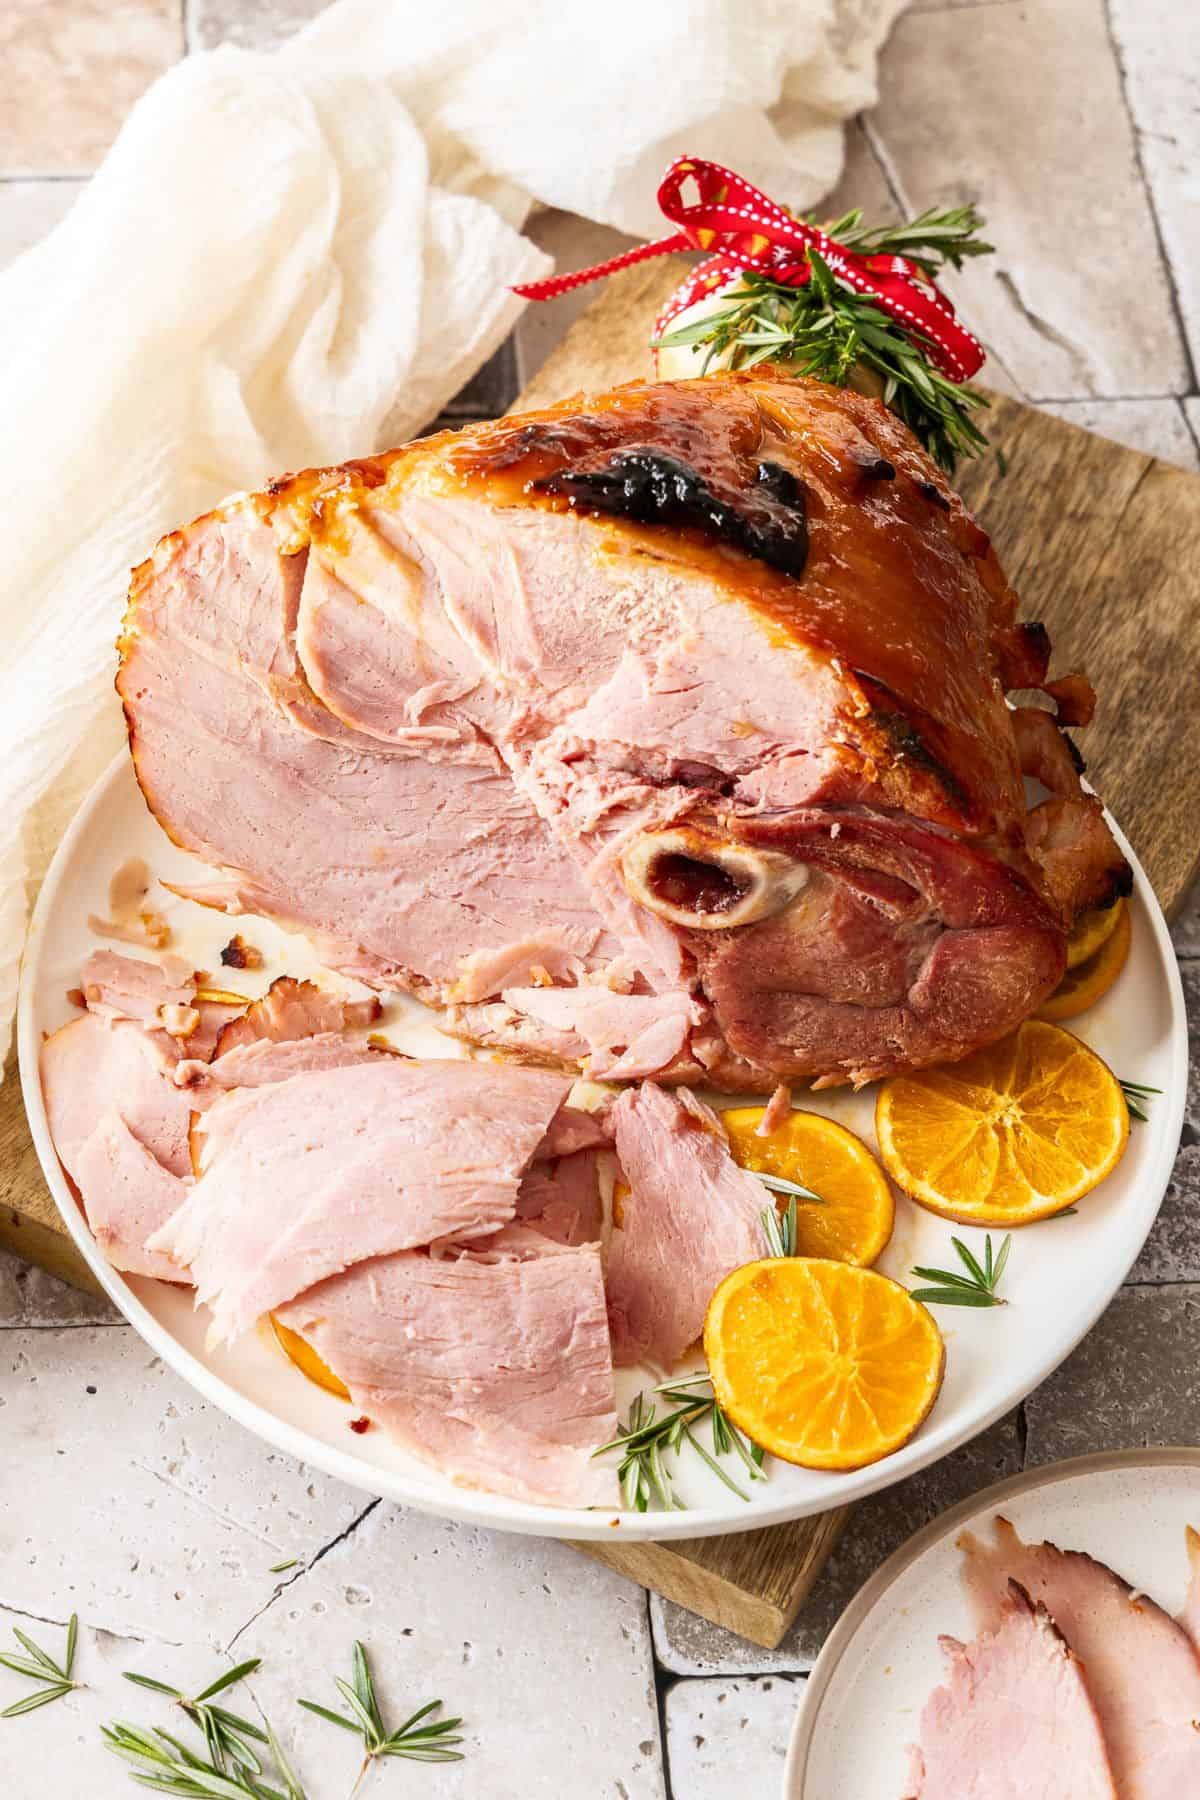 Marmalade Glazed Ham, sitting on a round white plate, with some slices of ham cut, and orange slices around the edge.